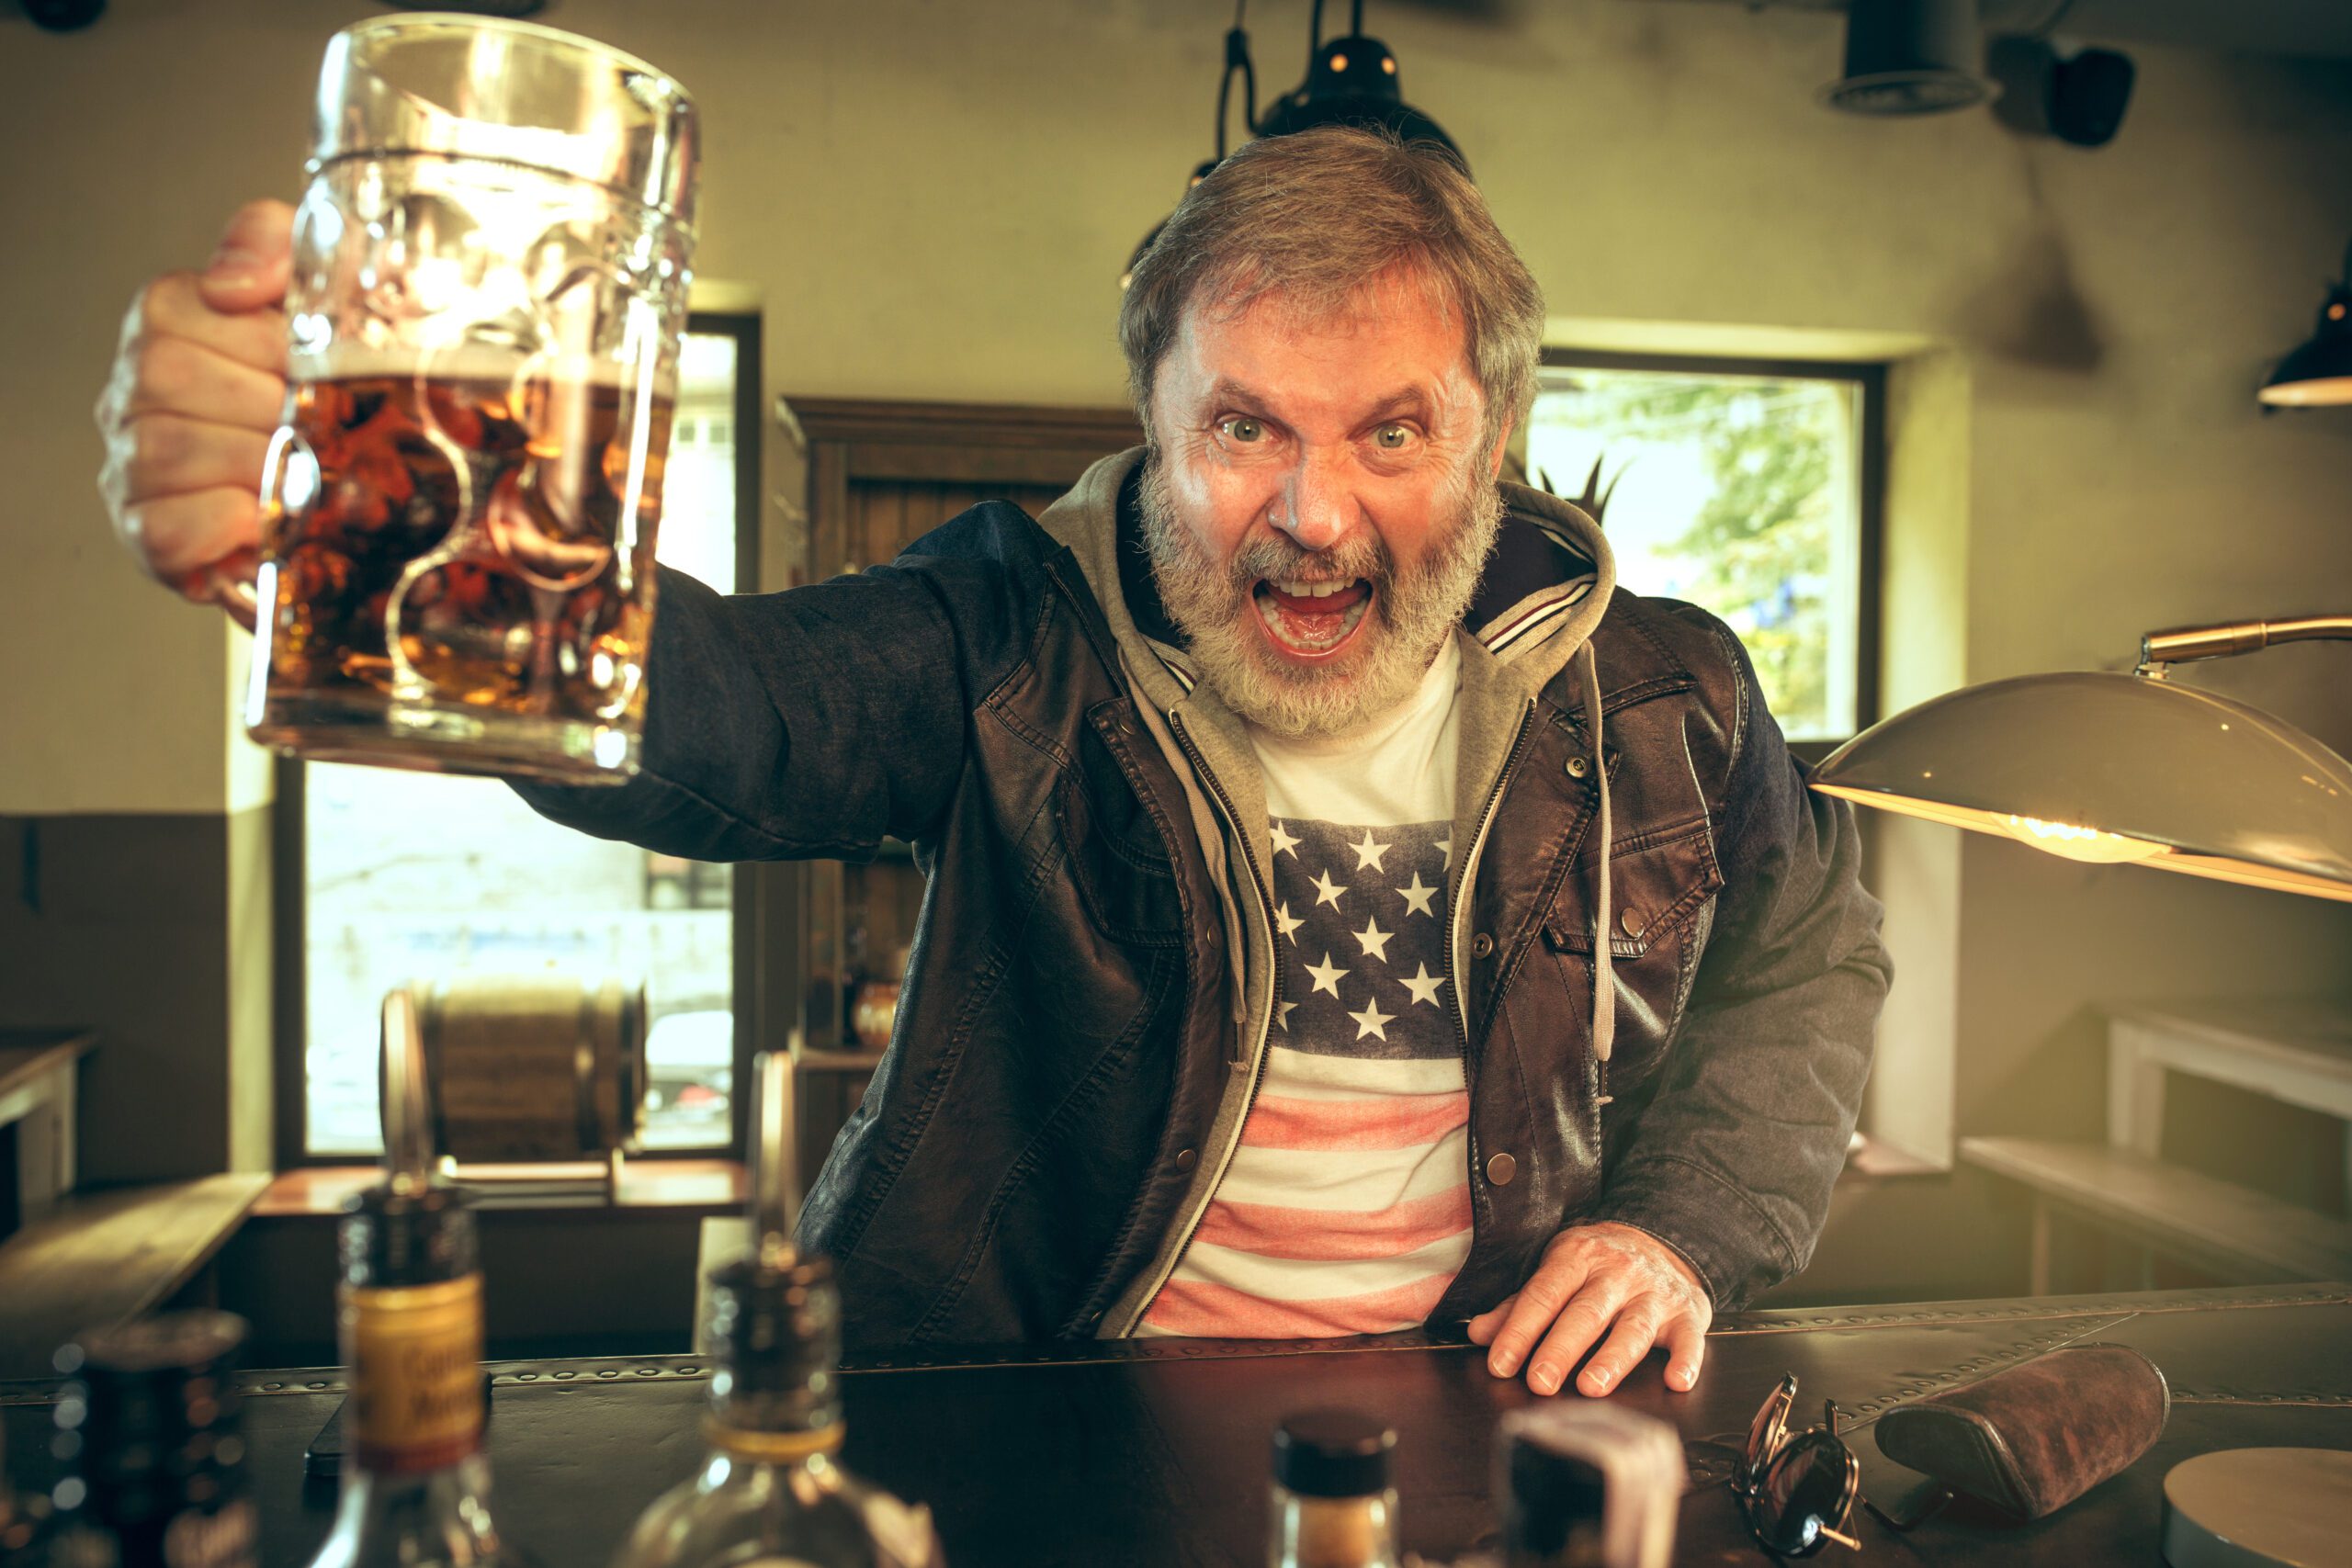 senior drinking home made beer at pub and is wishing he started on home beer brewing